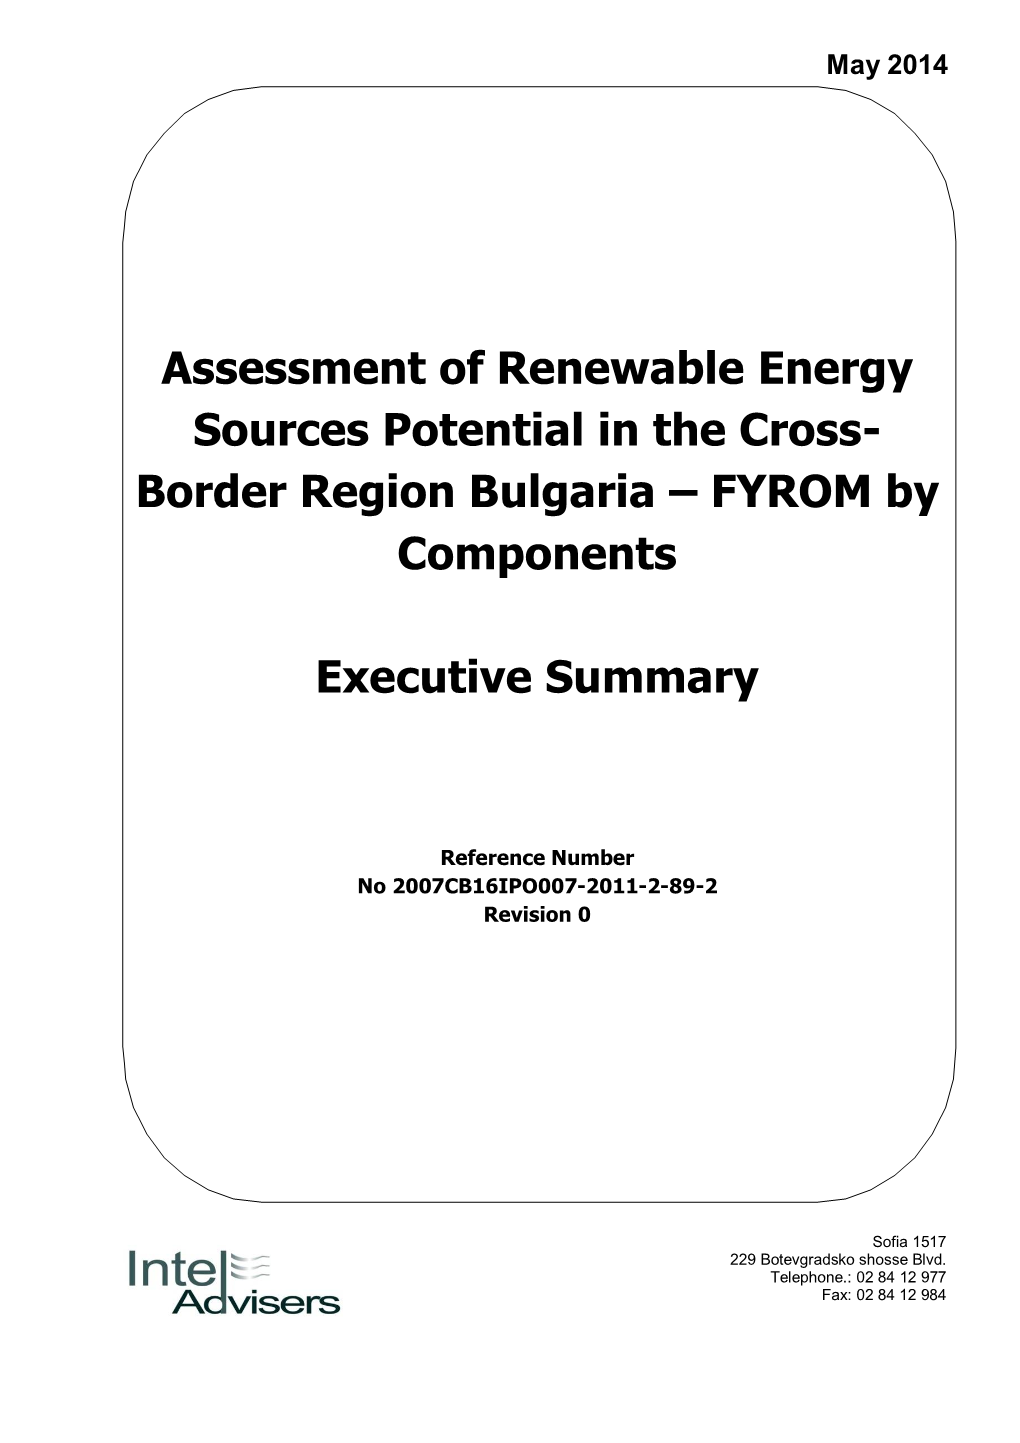 Assessment of Renewable Energy Sources Potential in the Cross- Border Region Bulgaria – FYROM by Components